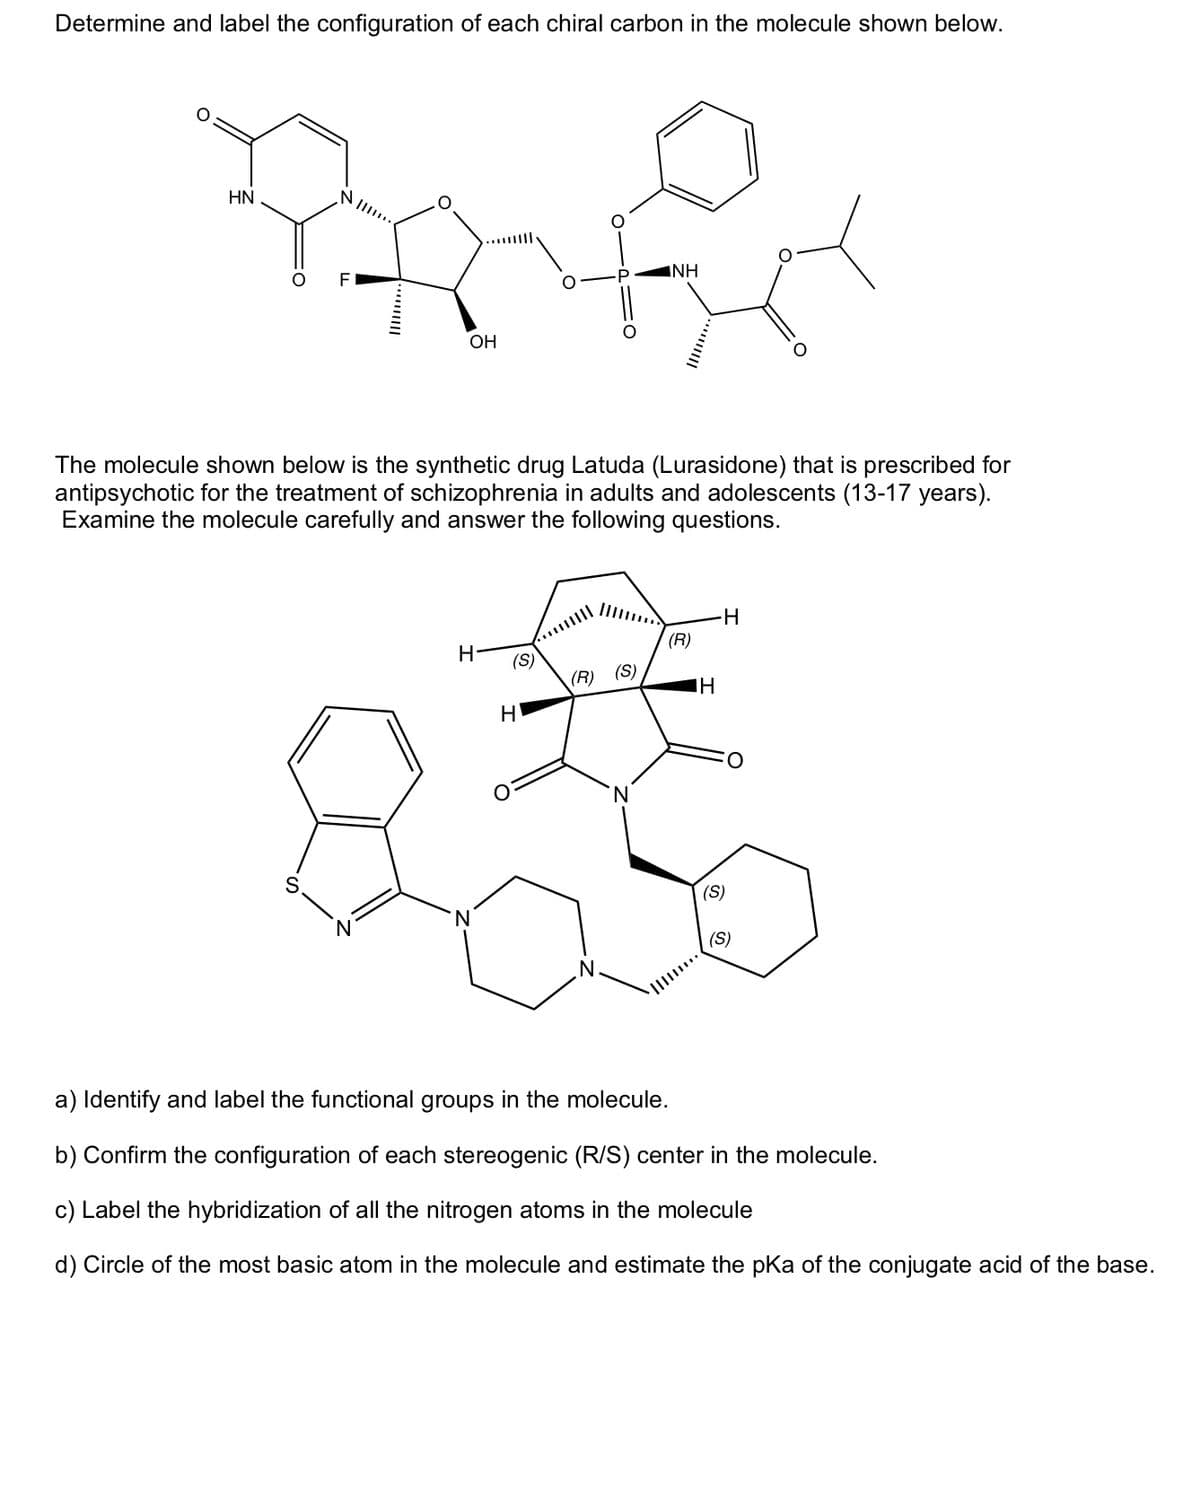 Determine and label the configuration of each chiral carbon in the molecule shown below.
HN
B
O FI
OH
The molecule shown below is the synthetic drug Latuda (Lurasidone) that is prescribed for
antipsychotic for the treatment of schizophrenia in adults and adolescents (13-17 years).
Examine the molecule carefully and answer the following questions.
H
'N
(S)
H
INH
(R) (S)
(R)
IH
H
(S)
O
(S)
a) Identify and label the functional groups in the molecule.
b) Confirm the configuration of each stereogenic (R/S) center the molecule.
c) Label the hybridization of all the nitrogen atoms in the molecule
d) Circle of the most basic atom in the molecule and estimate the pKa of the conjugate acid of the base.